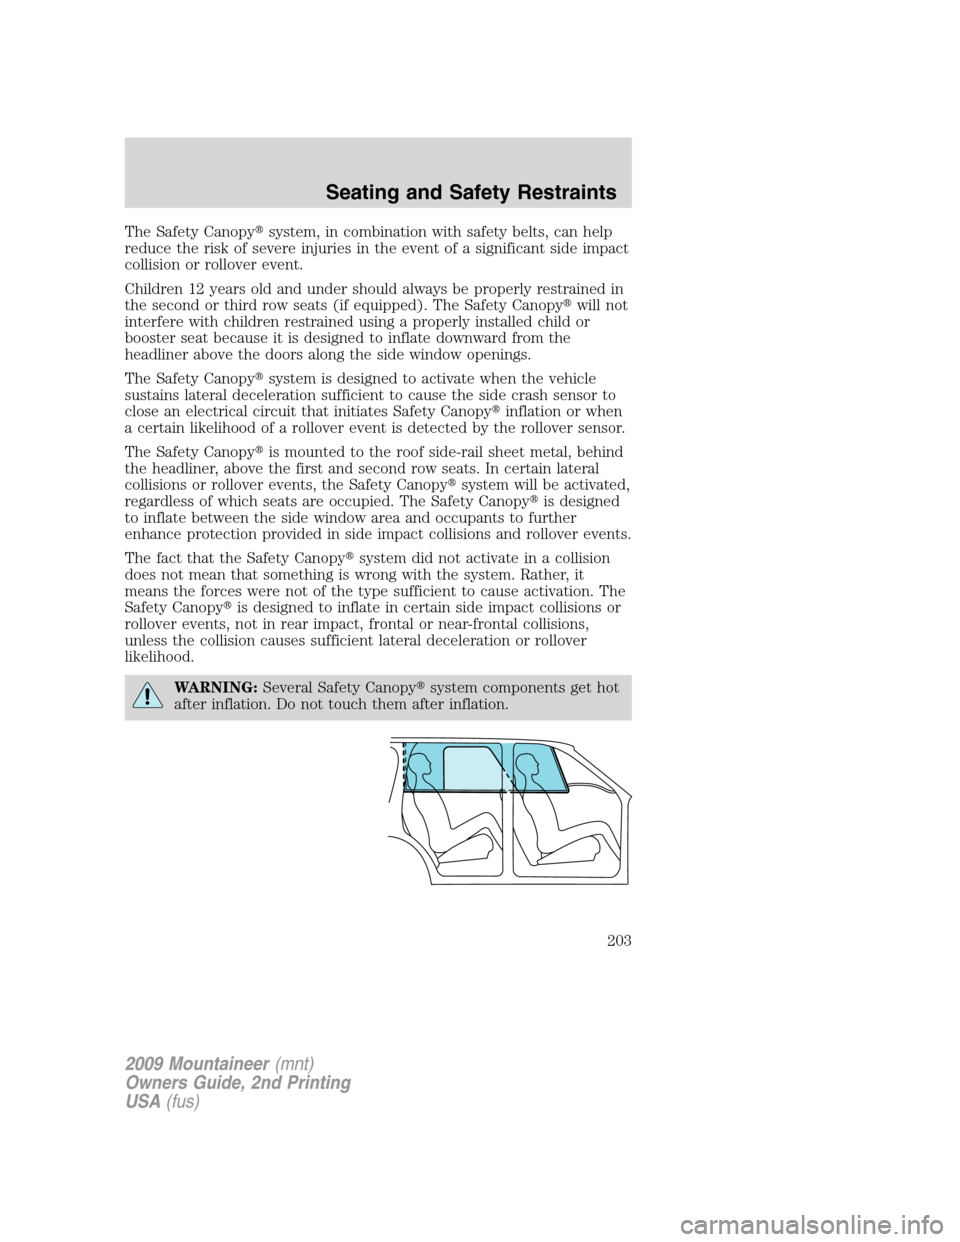 Mercury Mountaineer 2009  Owners Manuals The Safety Canopysystem, in combination with safety belts, can help
reduce the risk of severe injuries in the event of a significant side impact
collision or rollover event.
Children 12 years old and